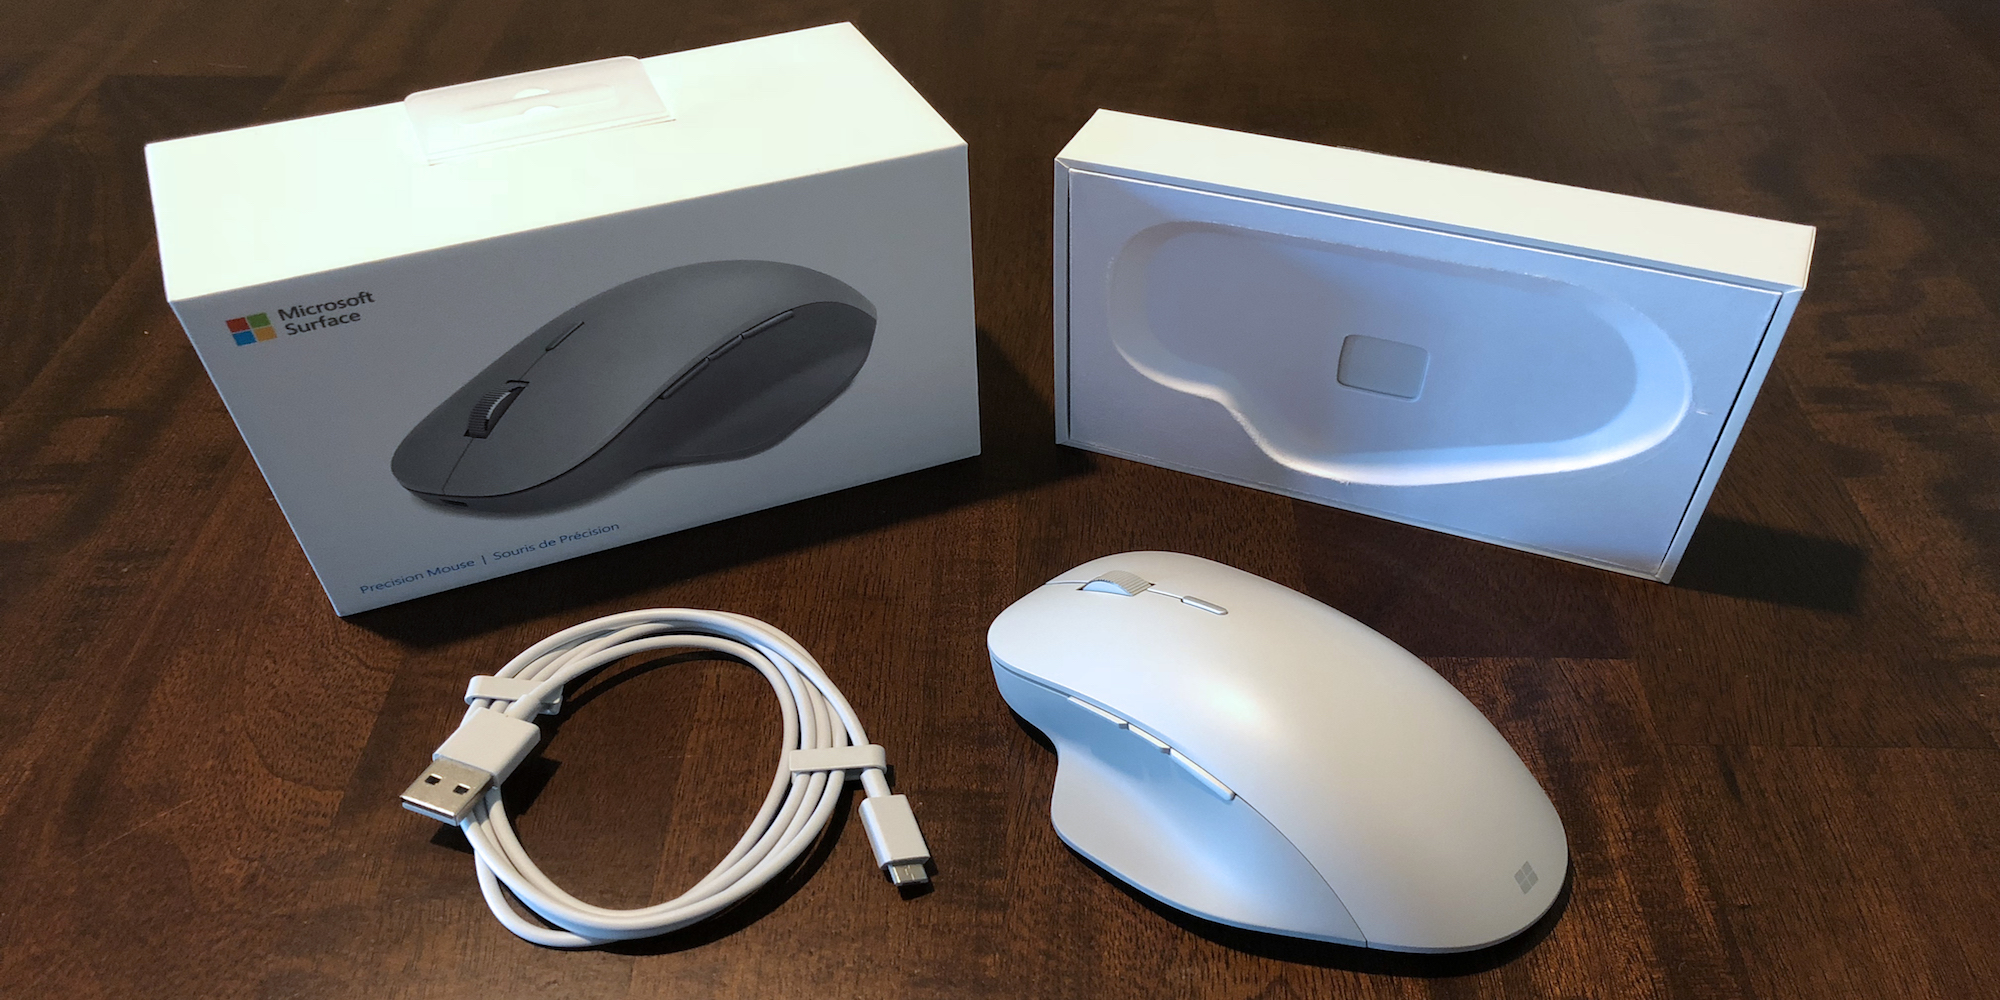 Microsoft Precision Mouse - Thinking Different about Mac functionality - 9to5Mac